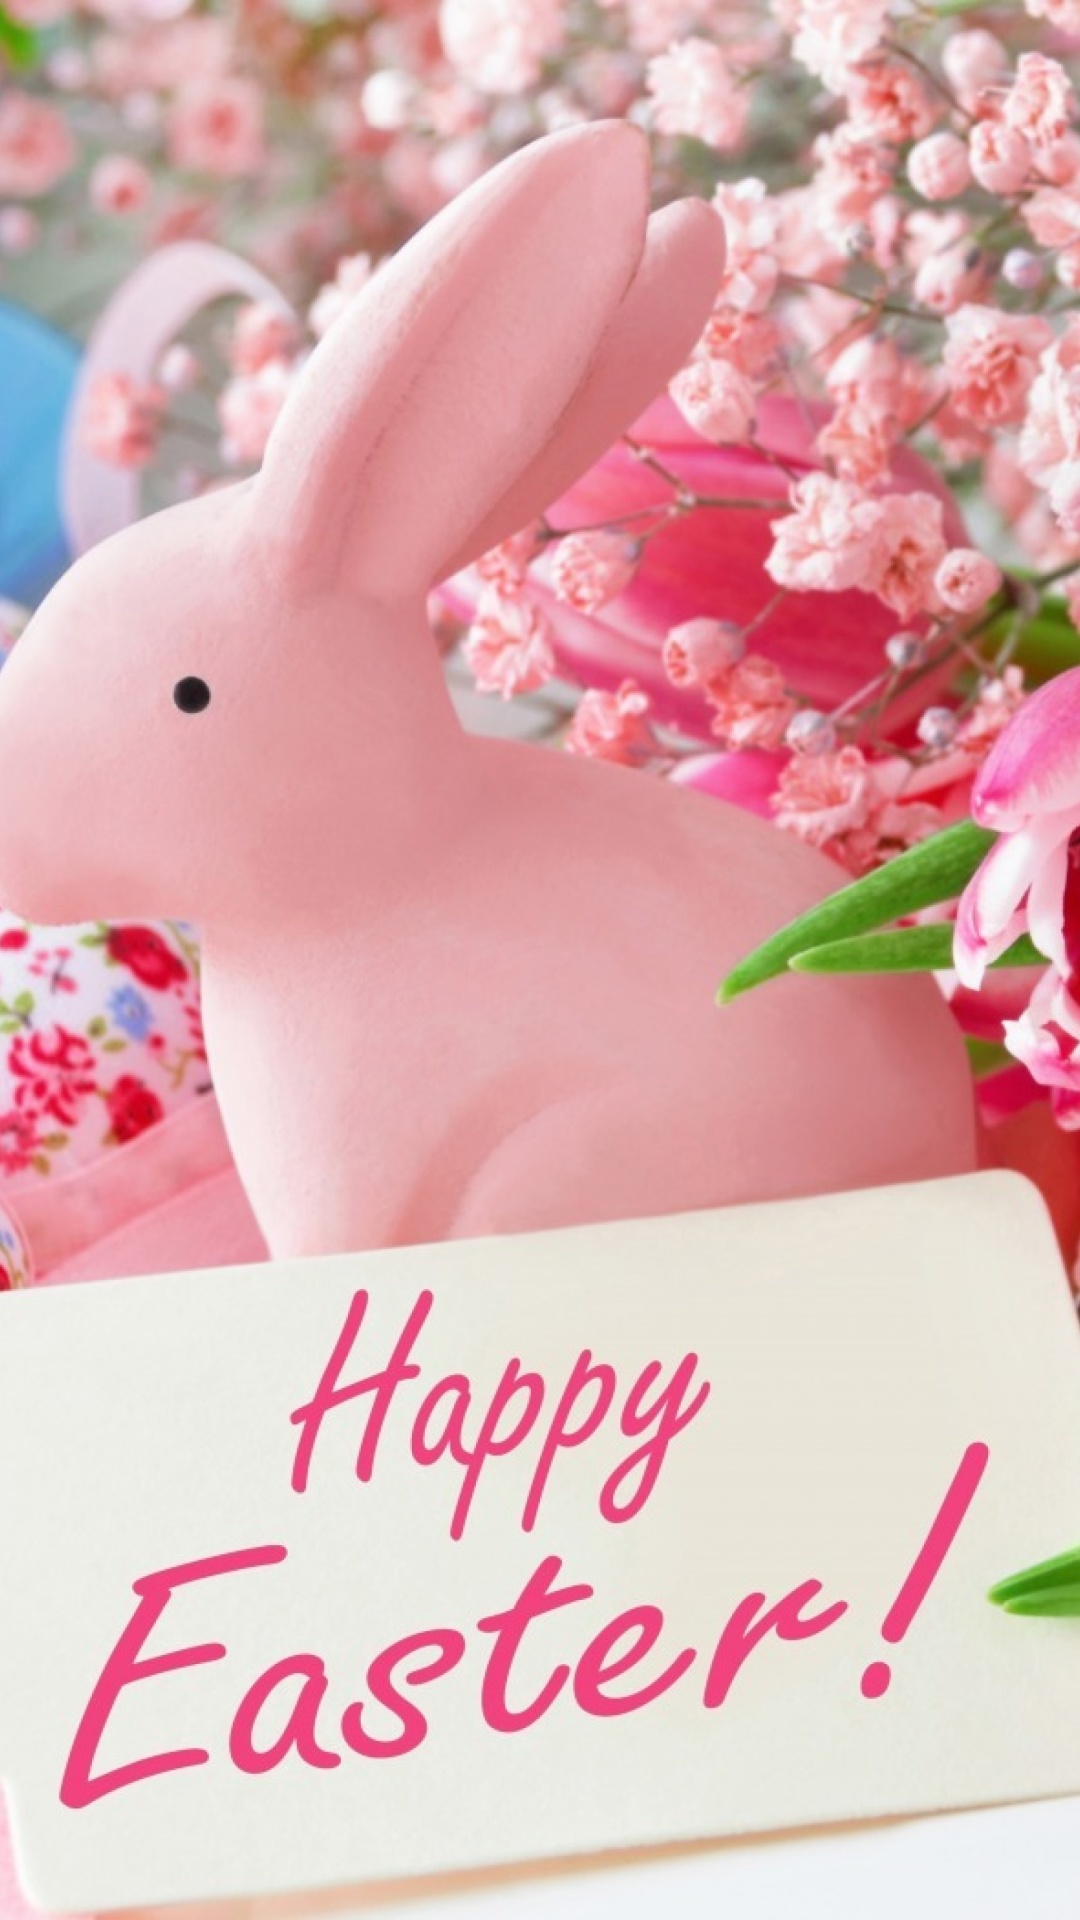 Pink Easter Decoration wallpaper 1080x1920